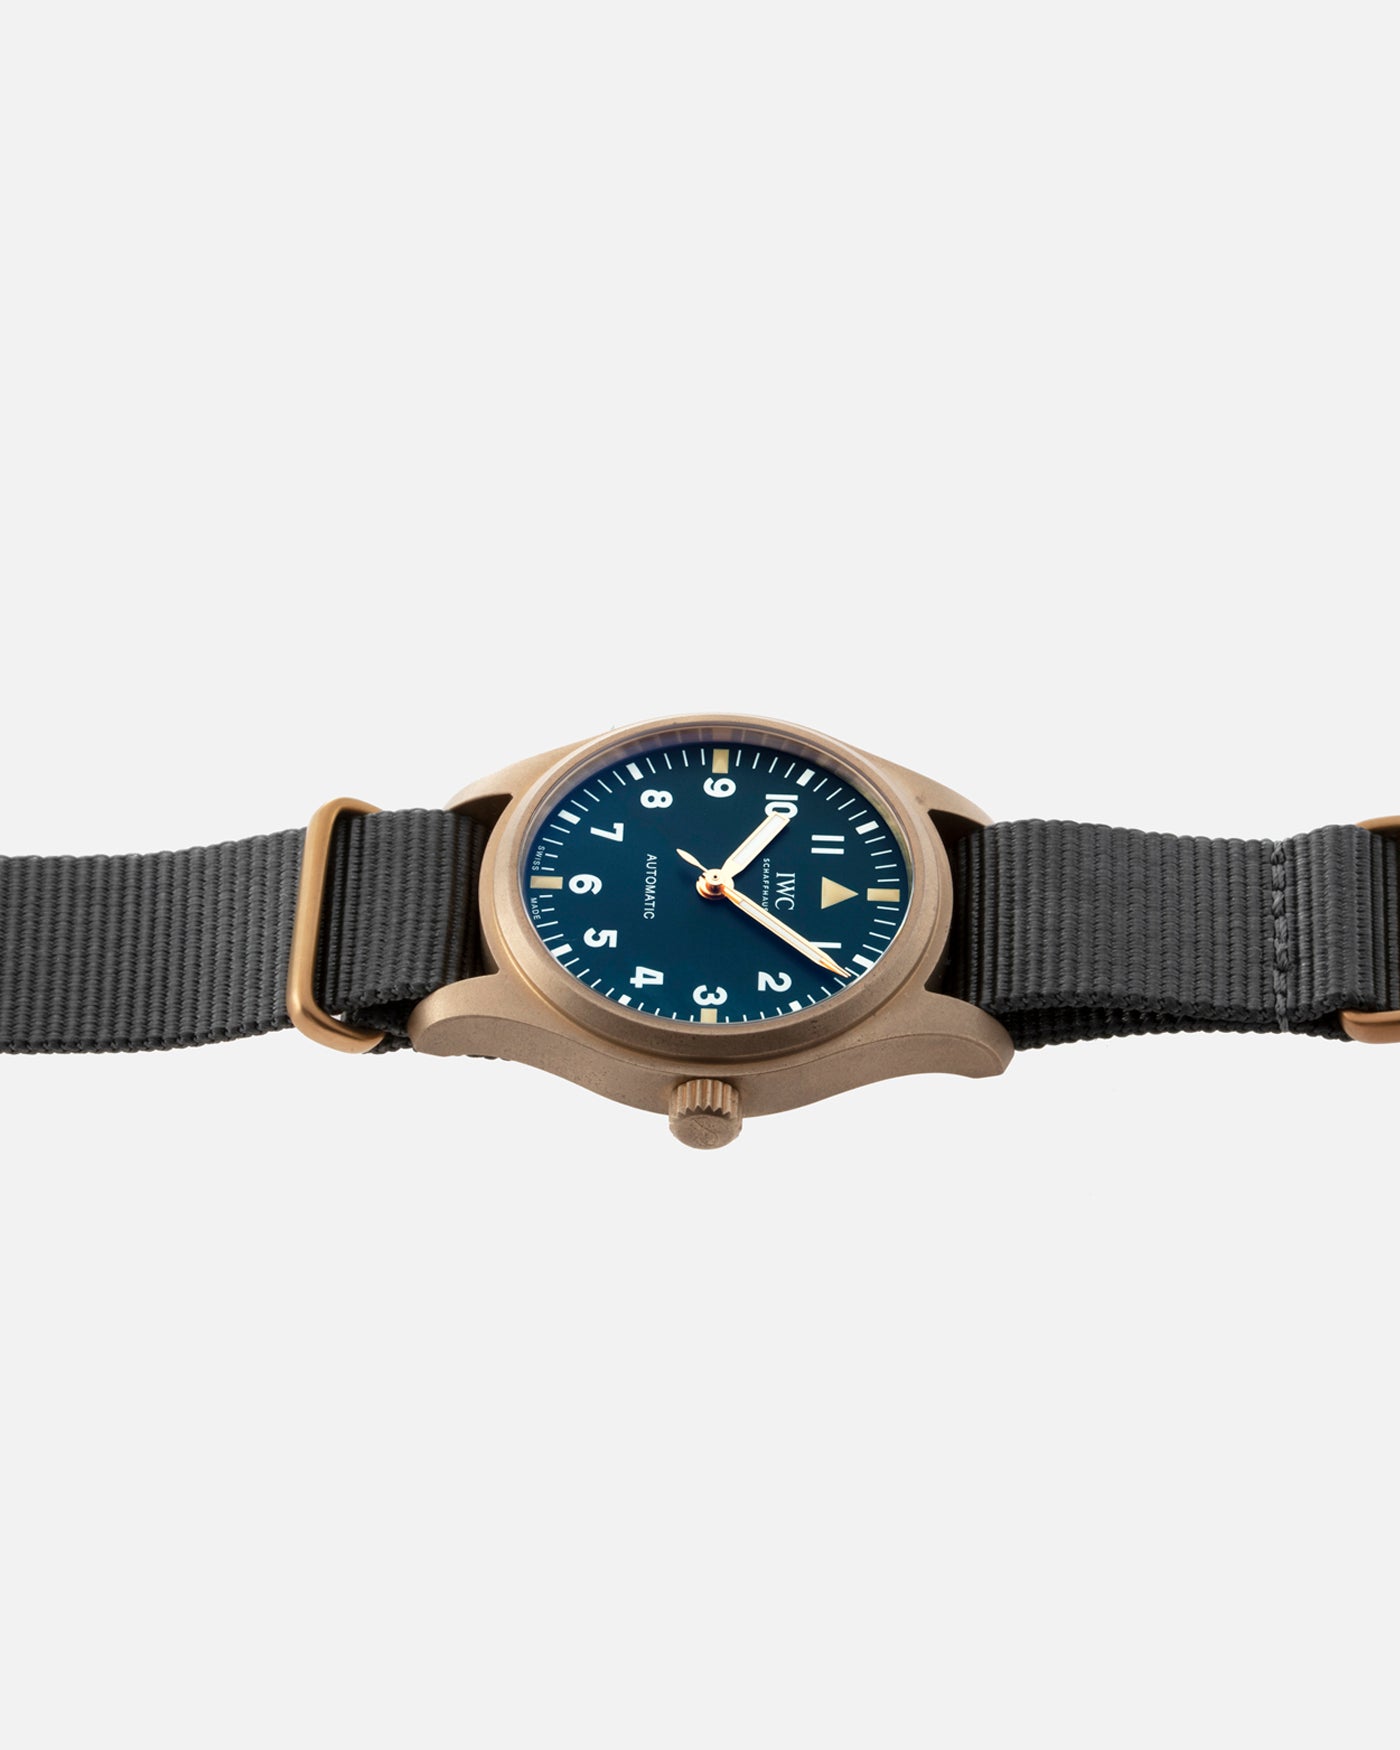 IWC Pilot for The Rake and Revolution